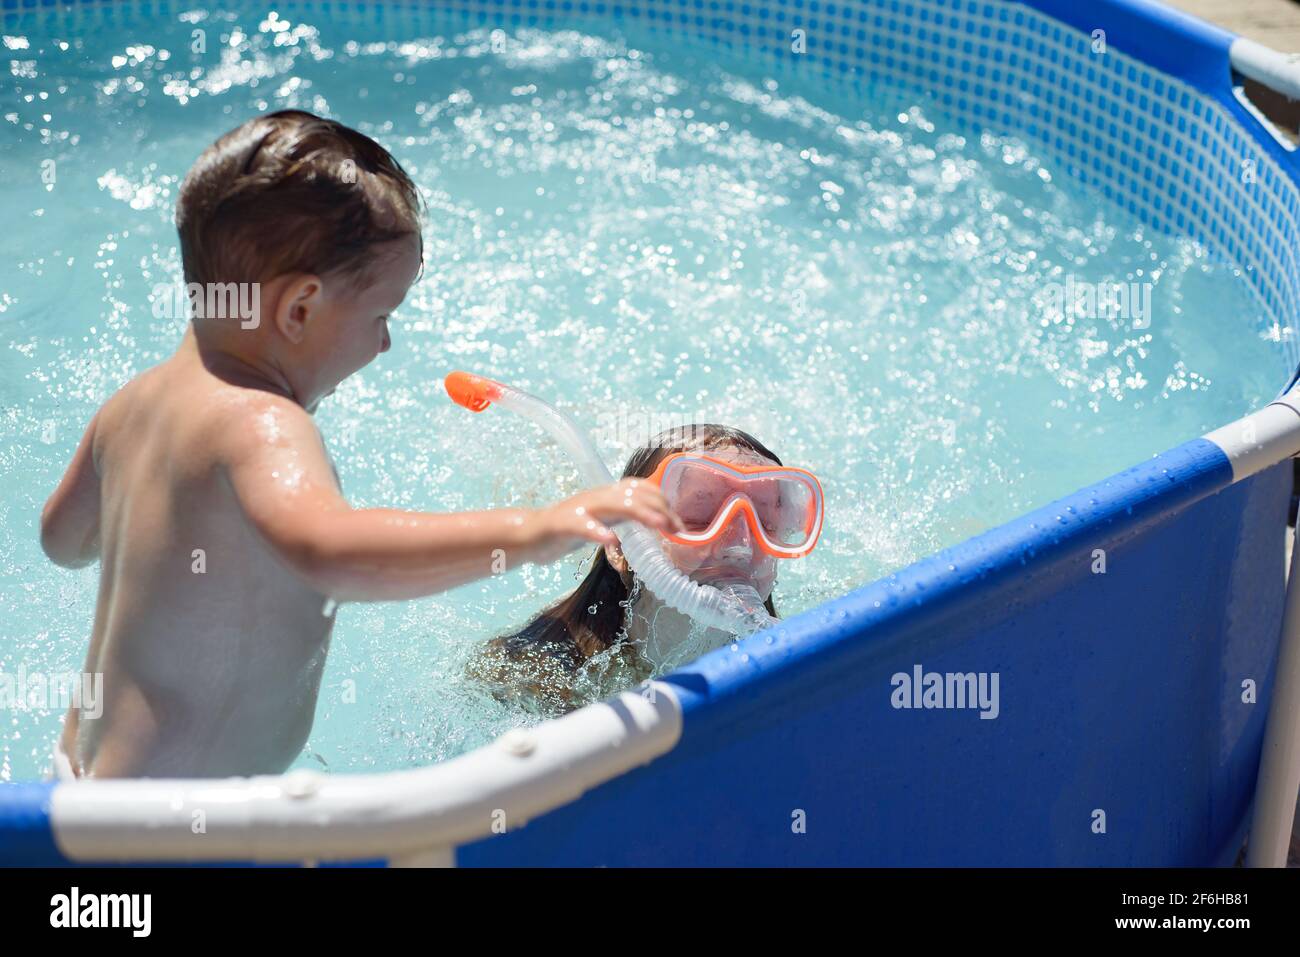 Children bath in the home swimming pool. Health benefits of hardening,  playing in water. Country holiday season Stock Photo - Alamy